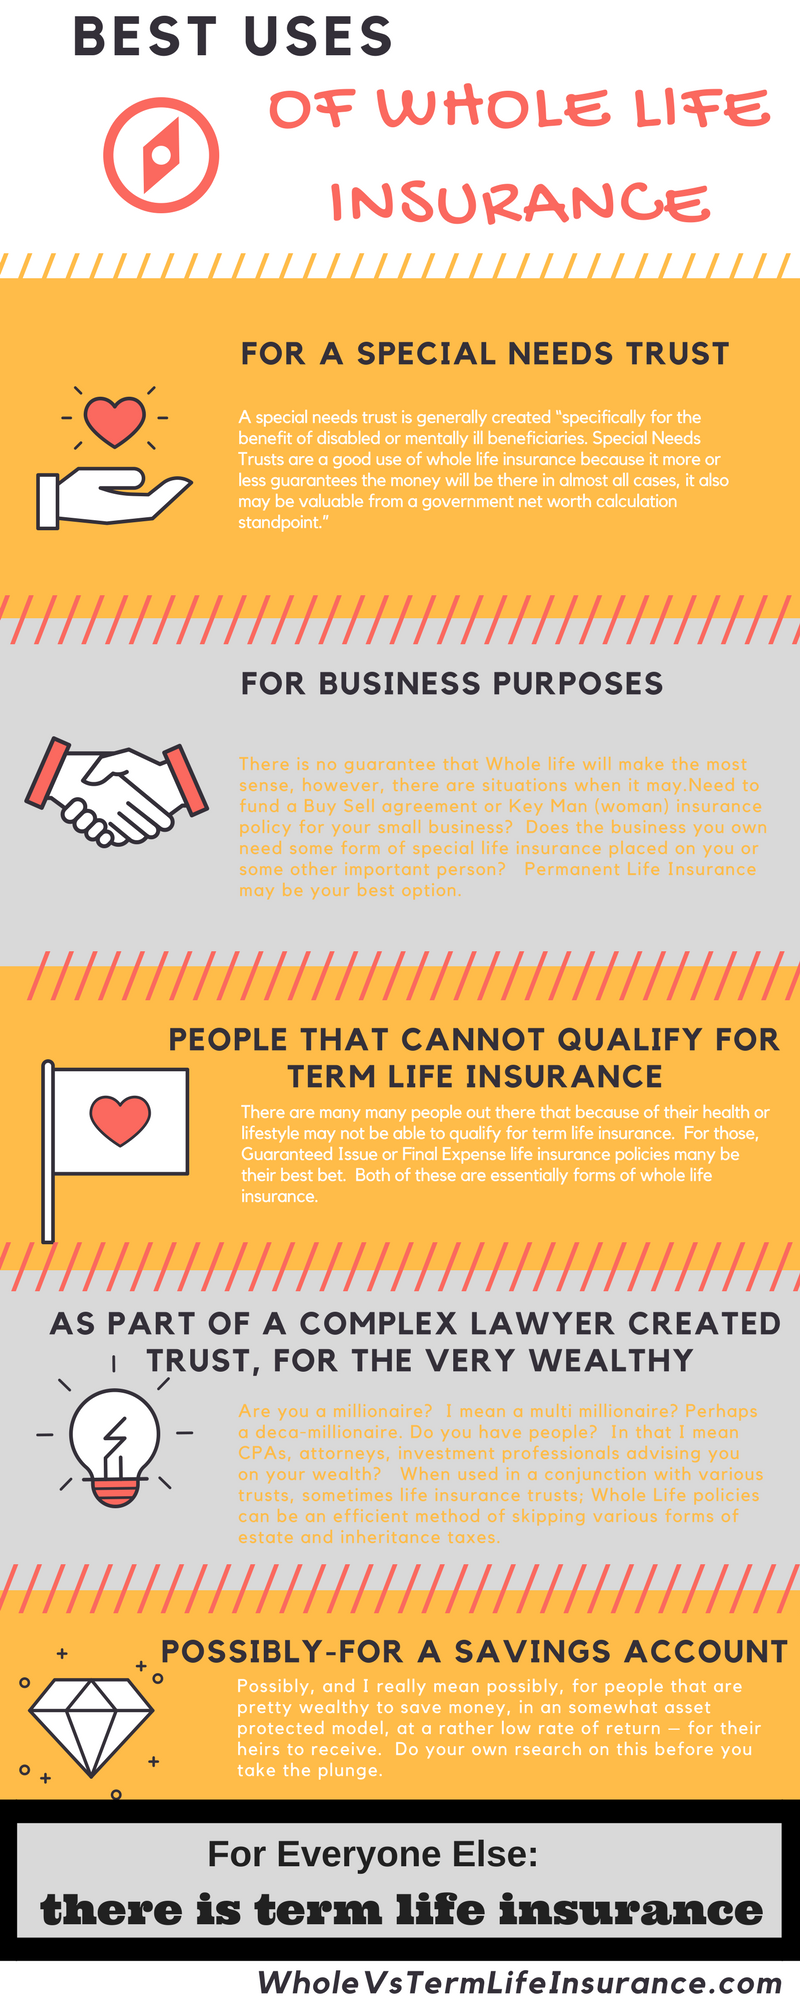 Whole Life Insurance infographic